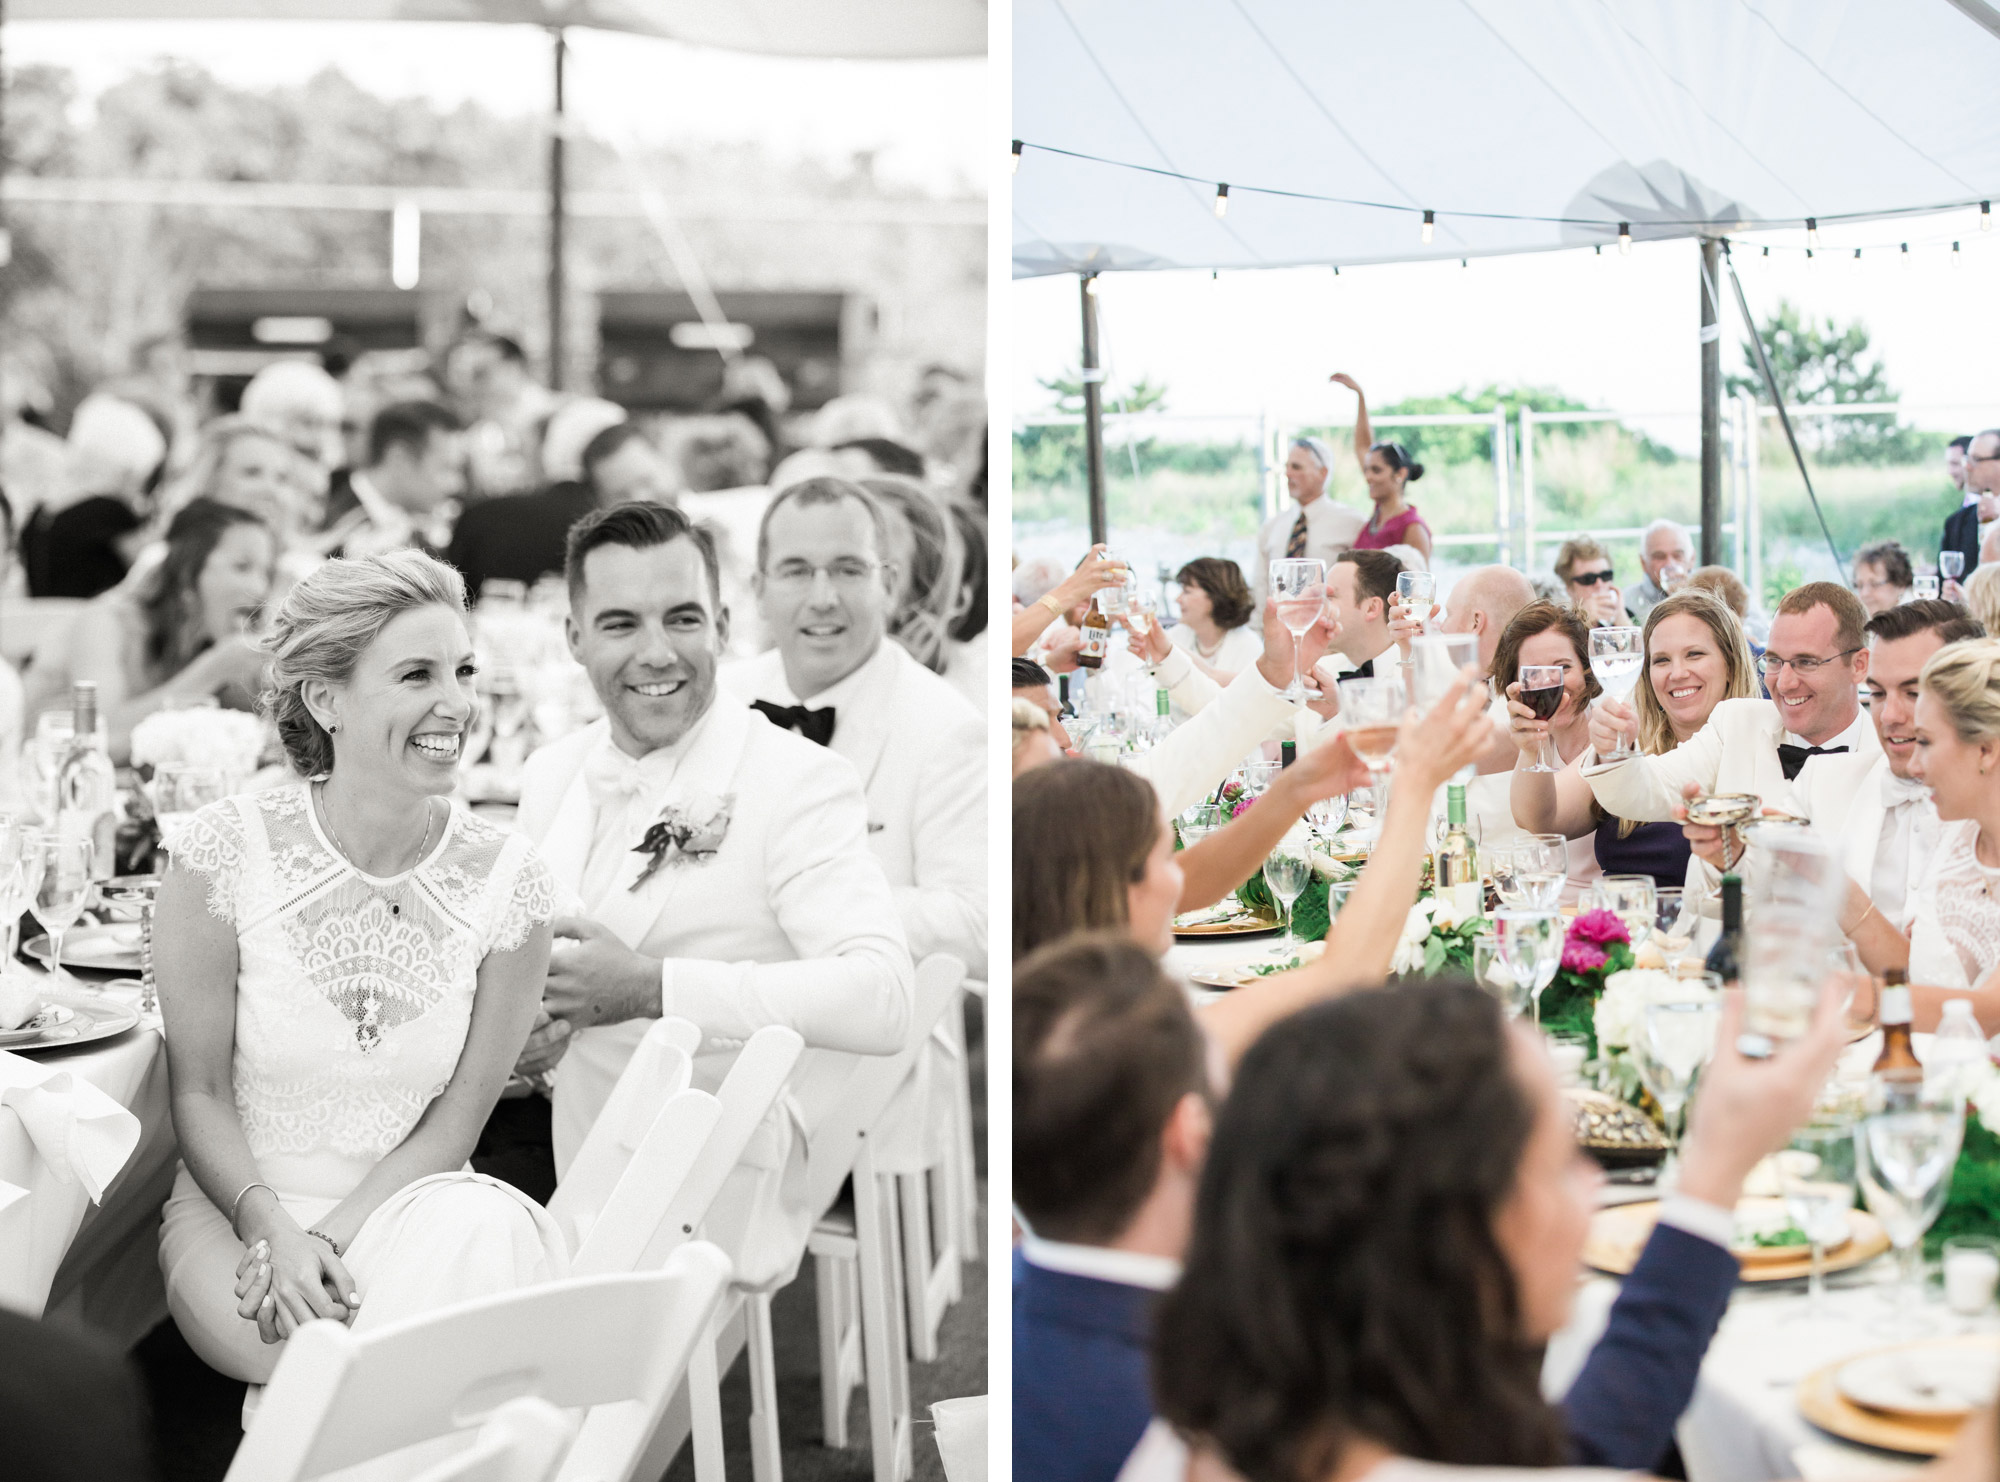 Wedding in Cape May, New Jersey. Photos by Kelly Kollar Photography.